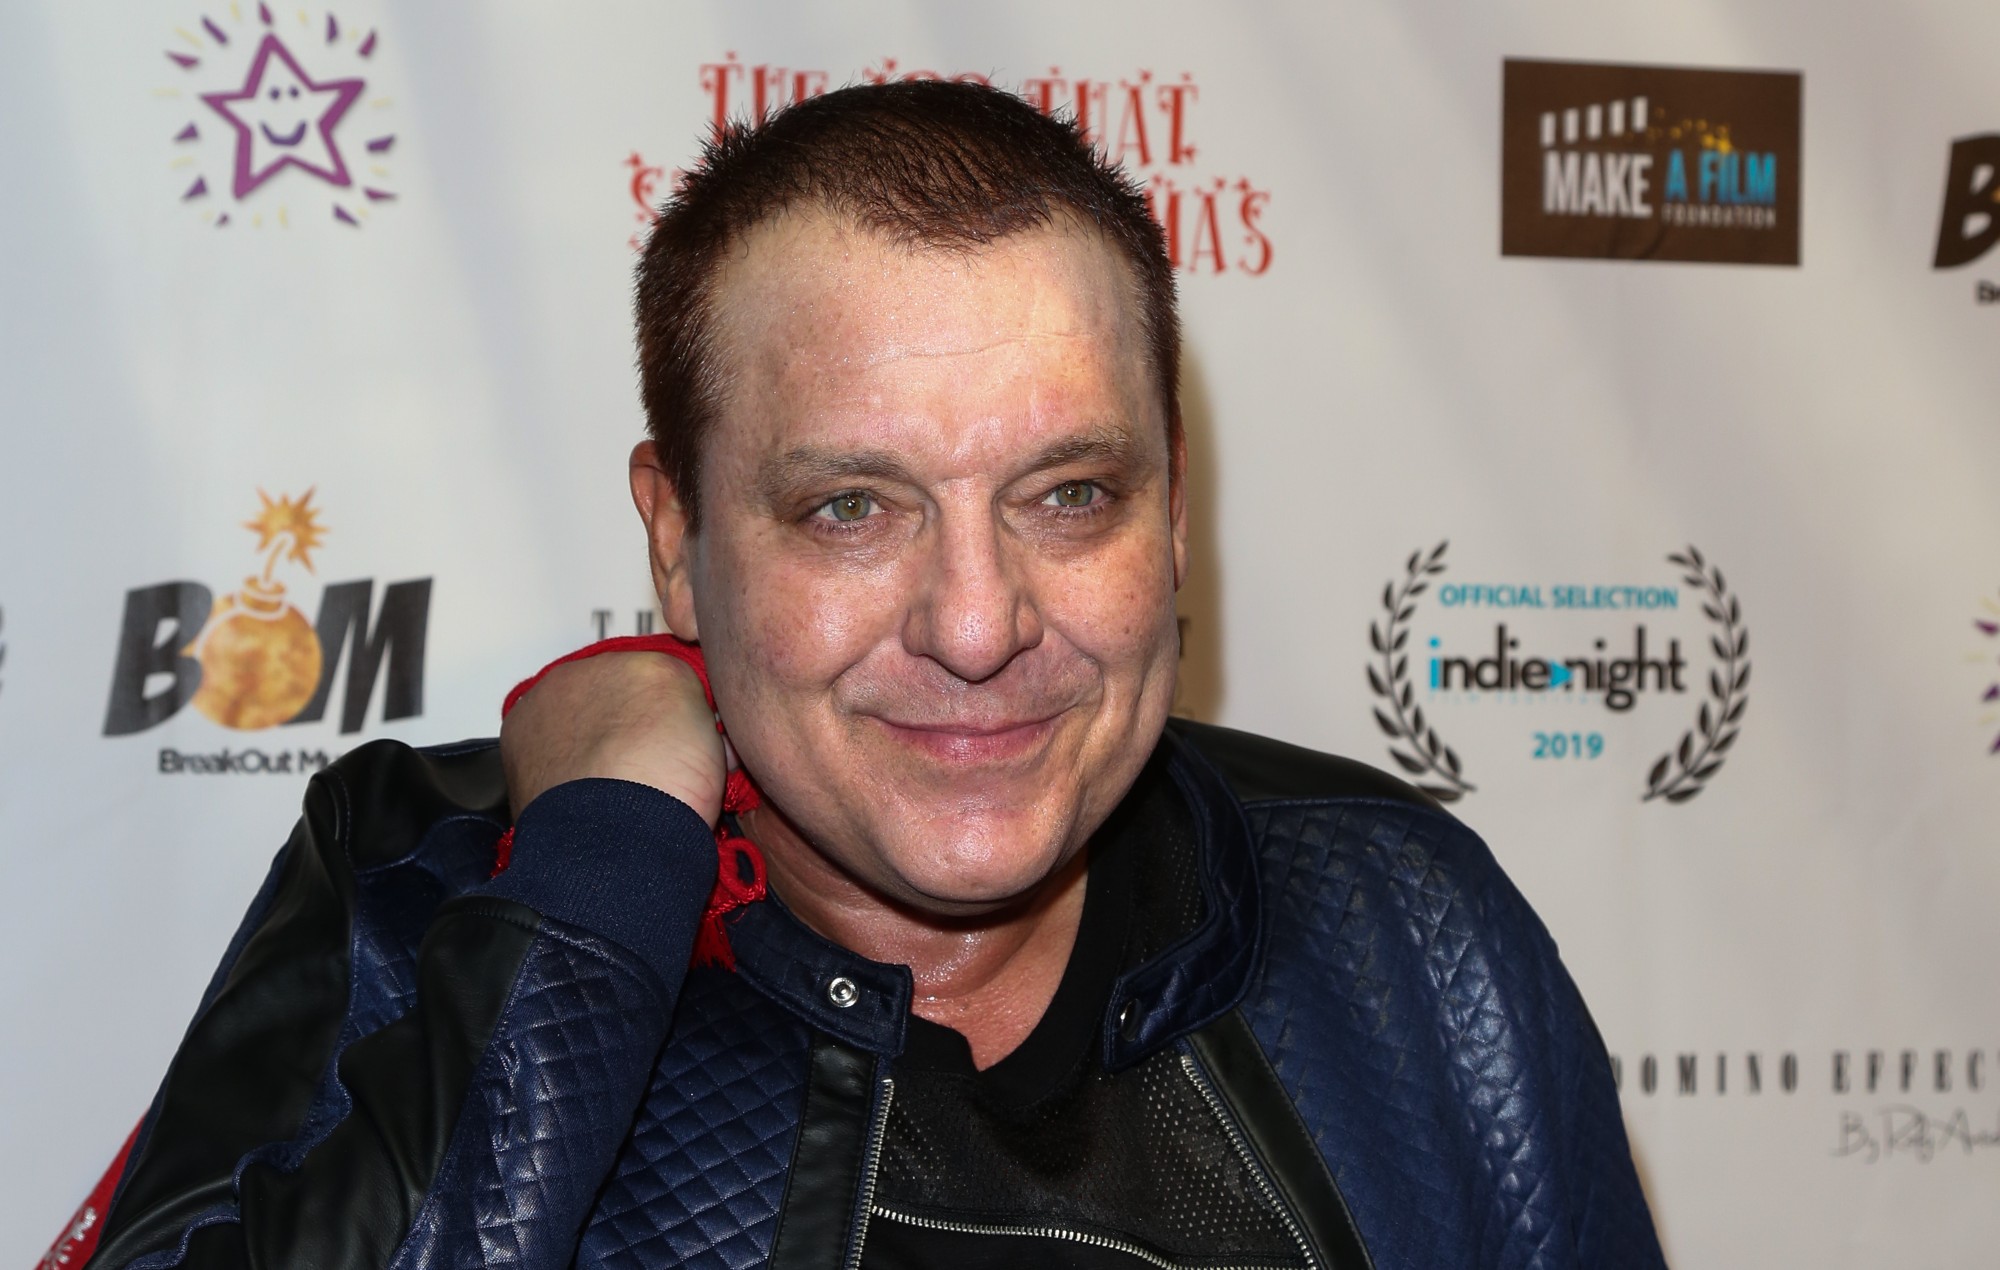 The Hollywood actor Tom Sizemore